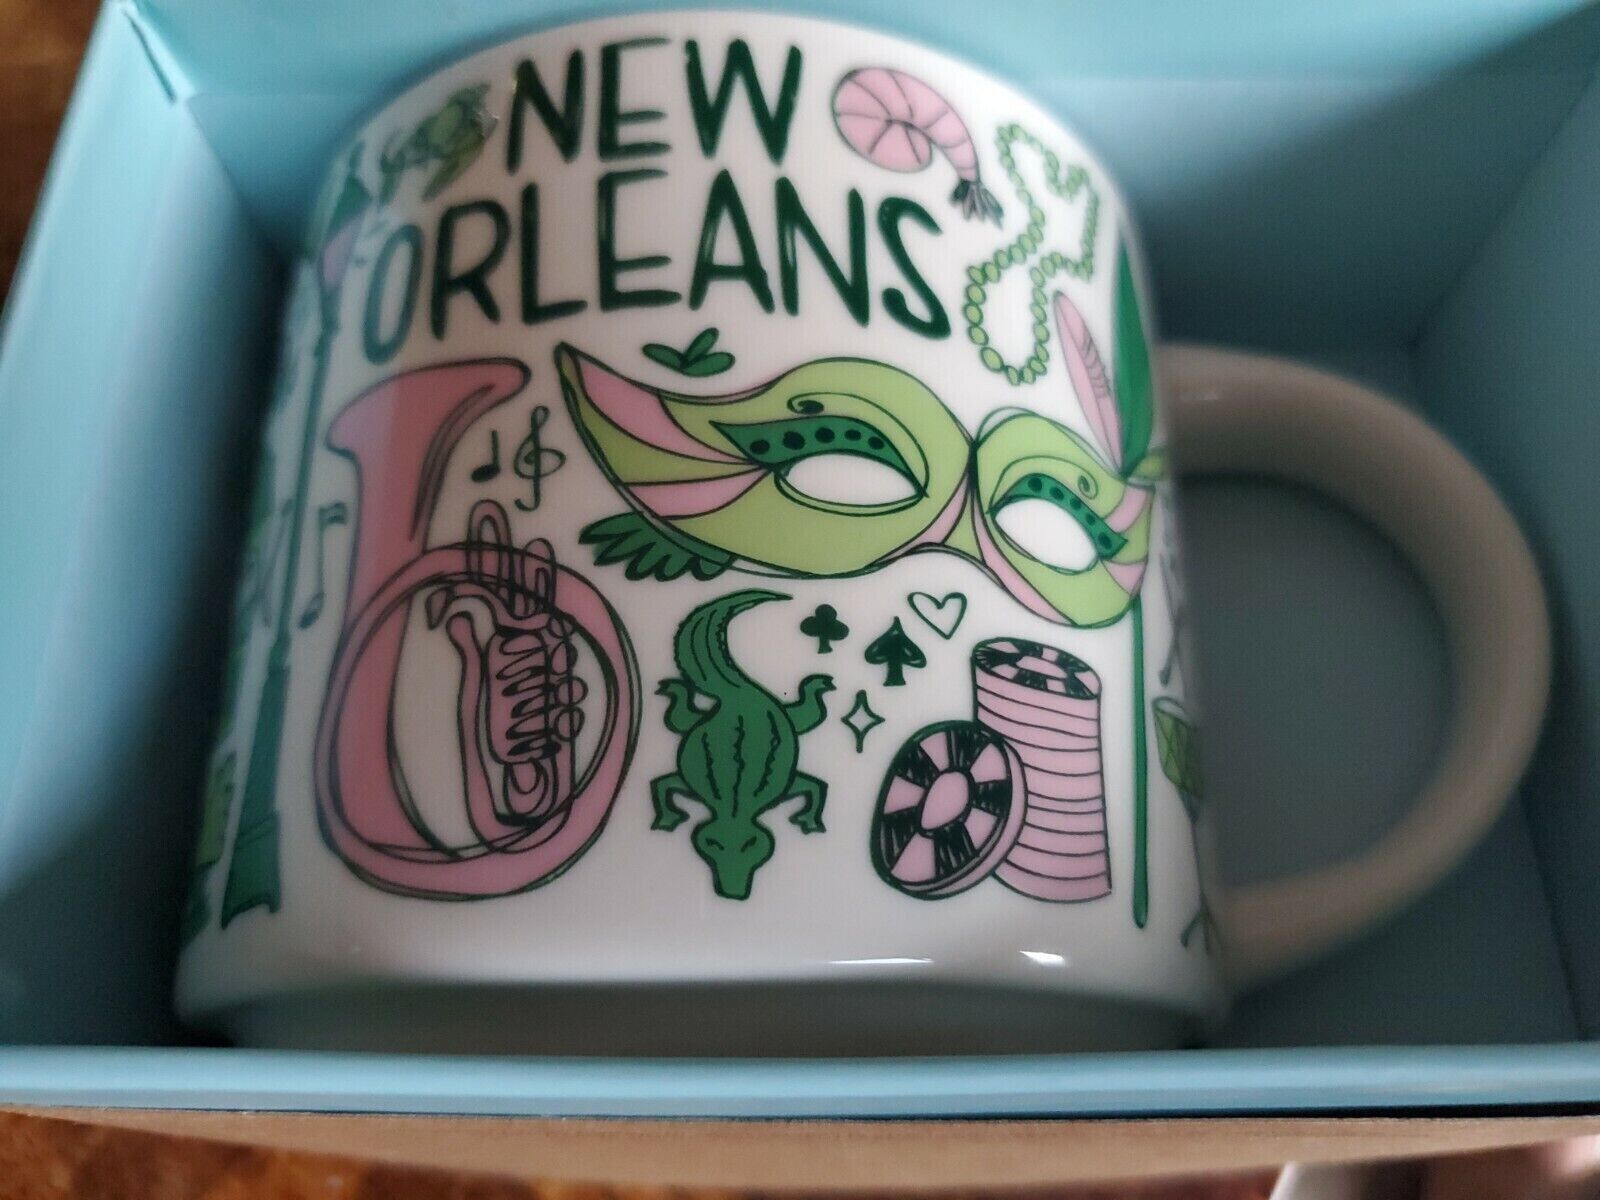 Starbucks mug, New Orleans, Been there series